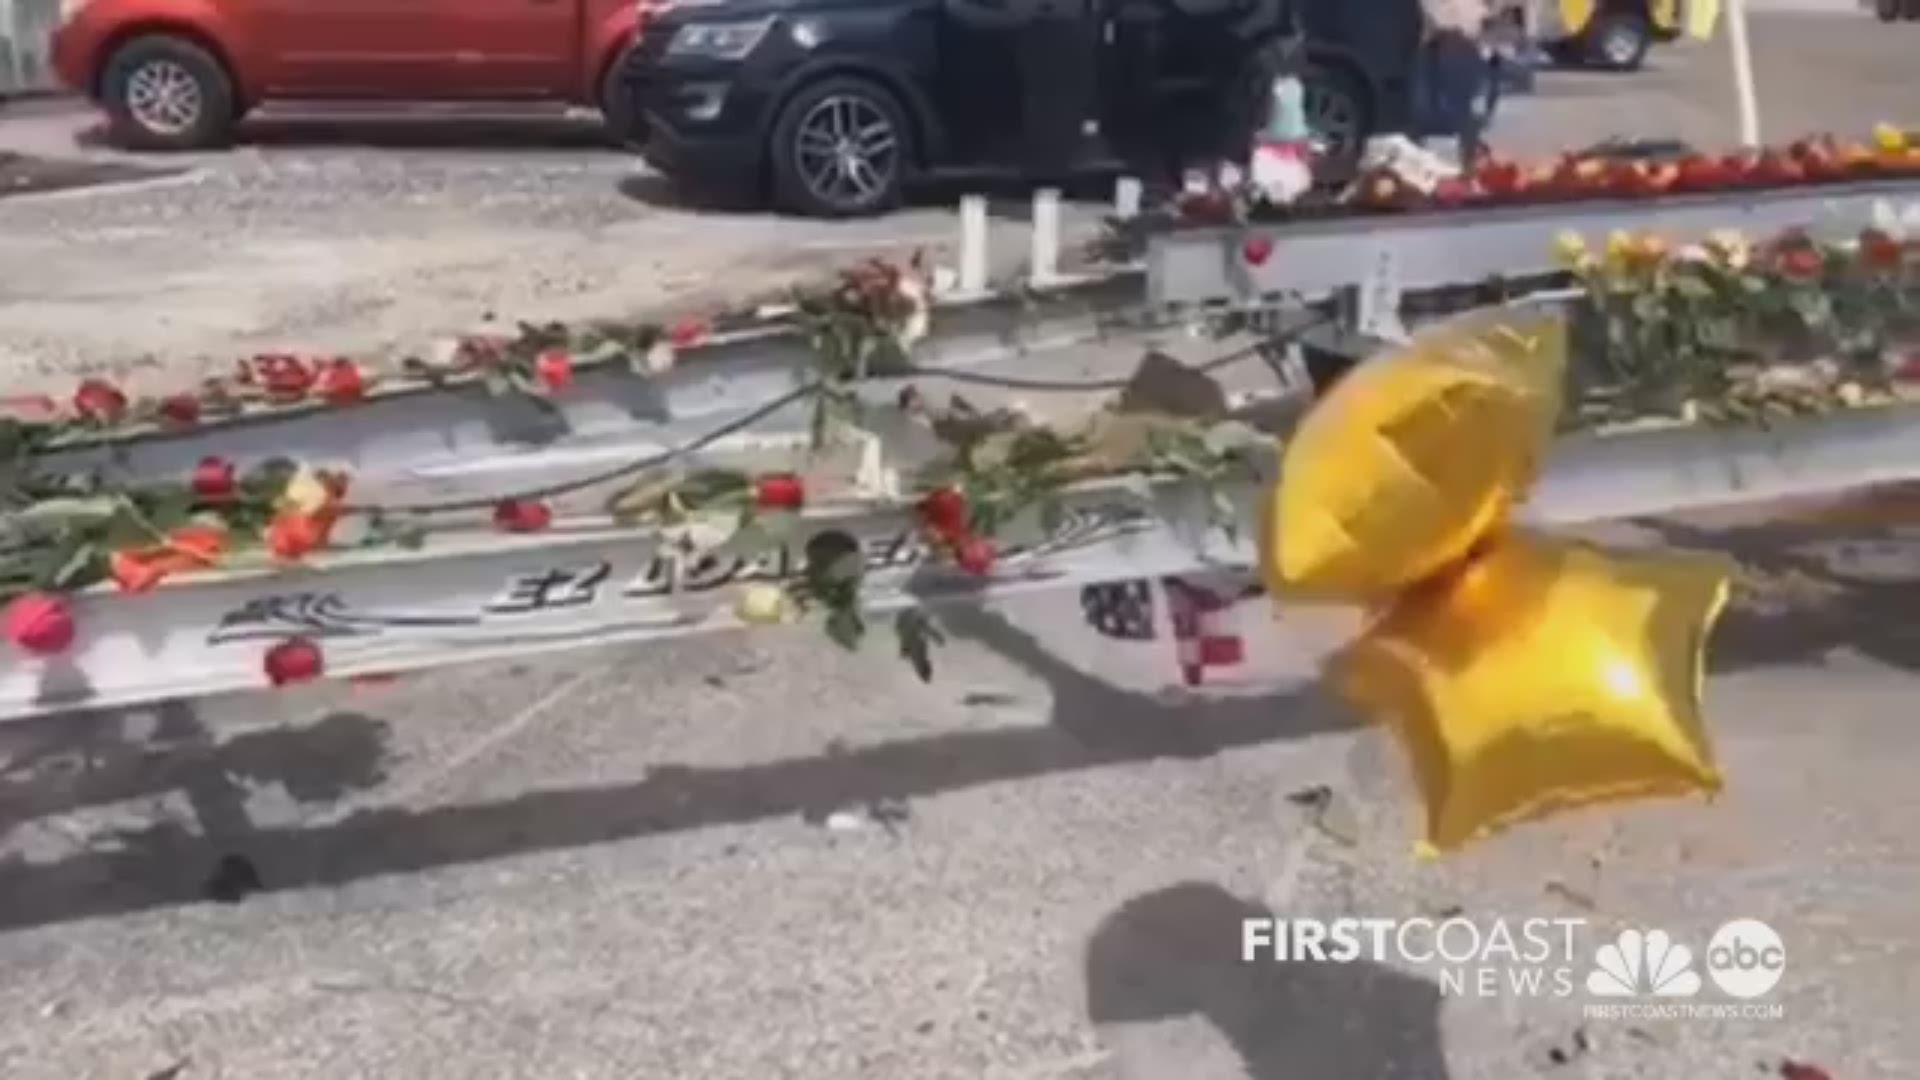 The boat trailer of a missing Jacksonville Fire and Rescue firefighter lost at sea has been turned into a makeshift memorial adorned with flowers, ribbons, candles and balloons.